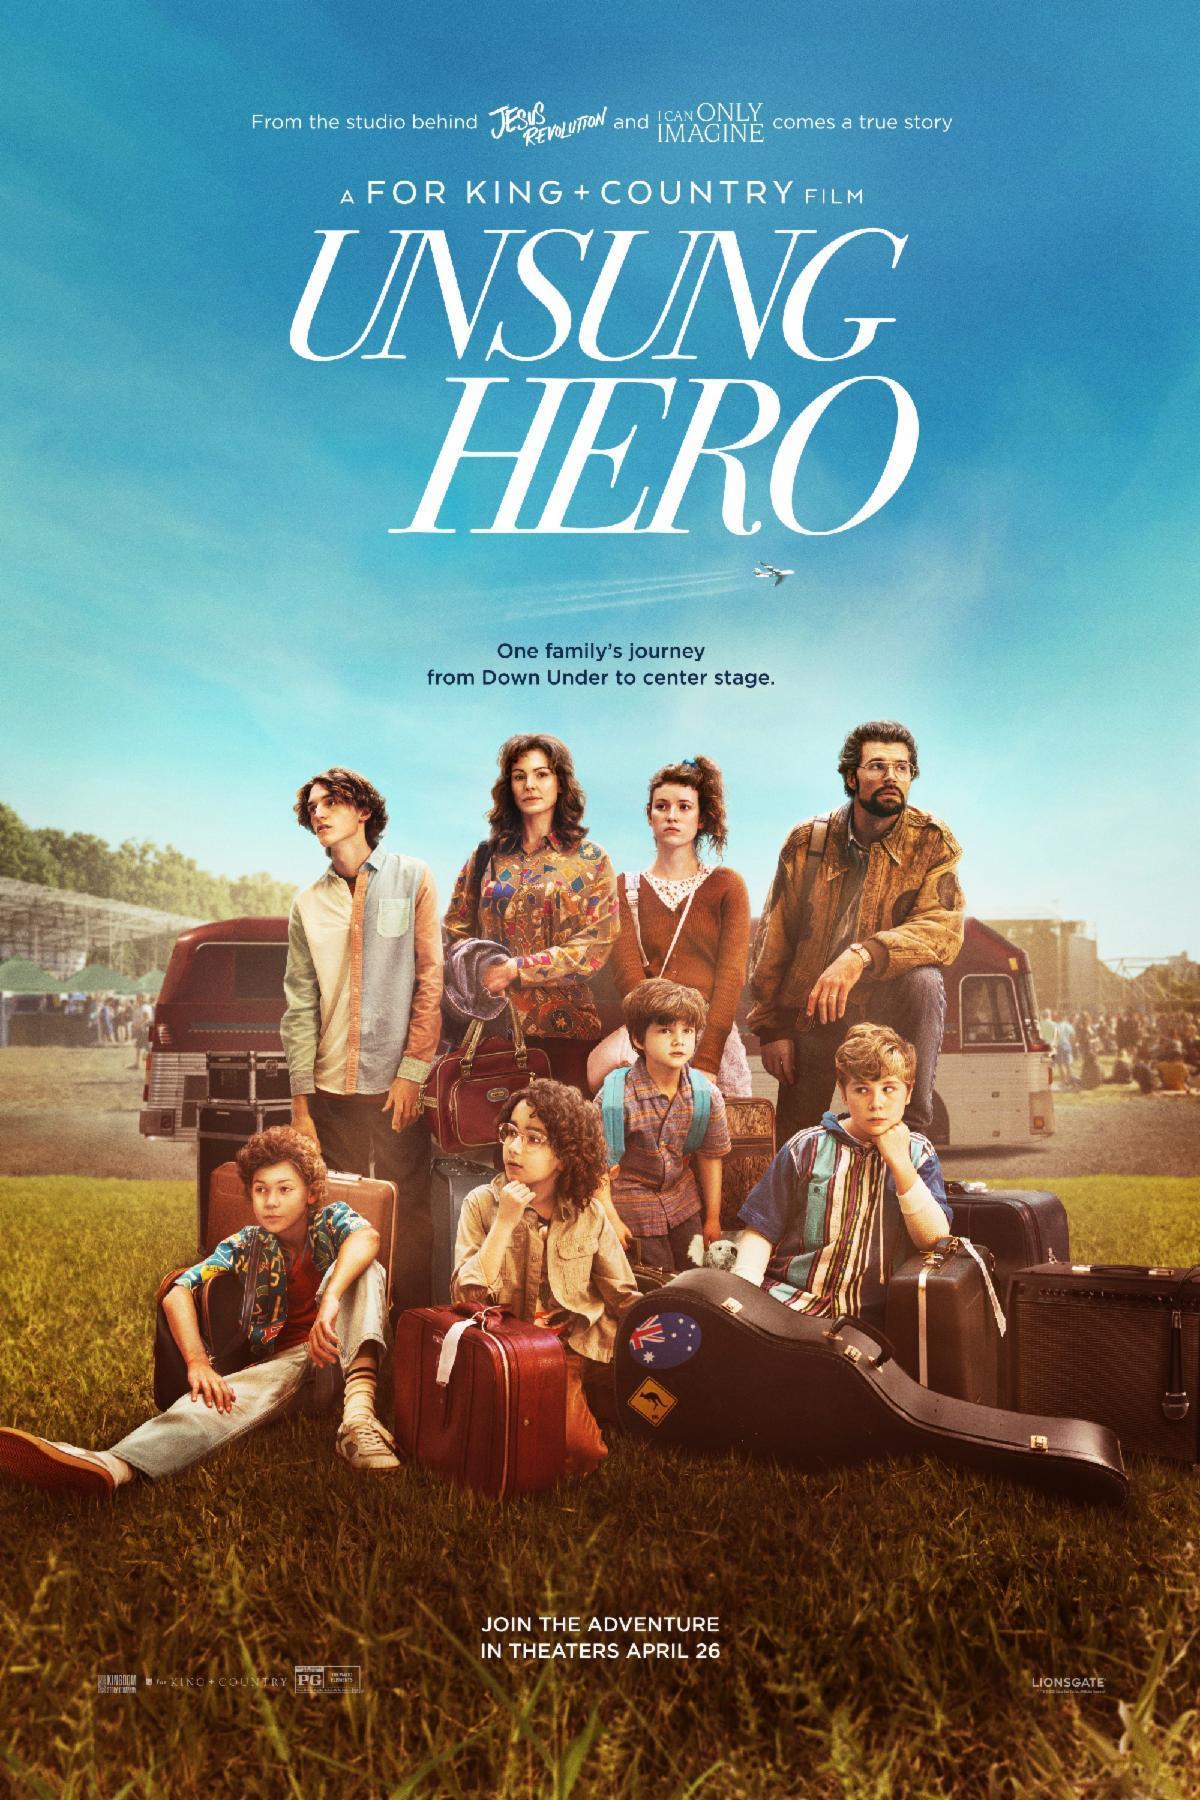 ‘Unsung Hero’: Cheers and tears over God's provision (movie review)